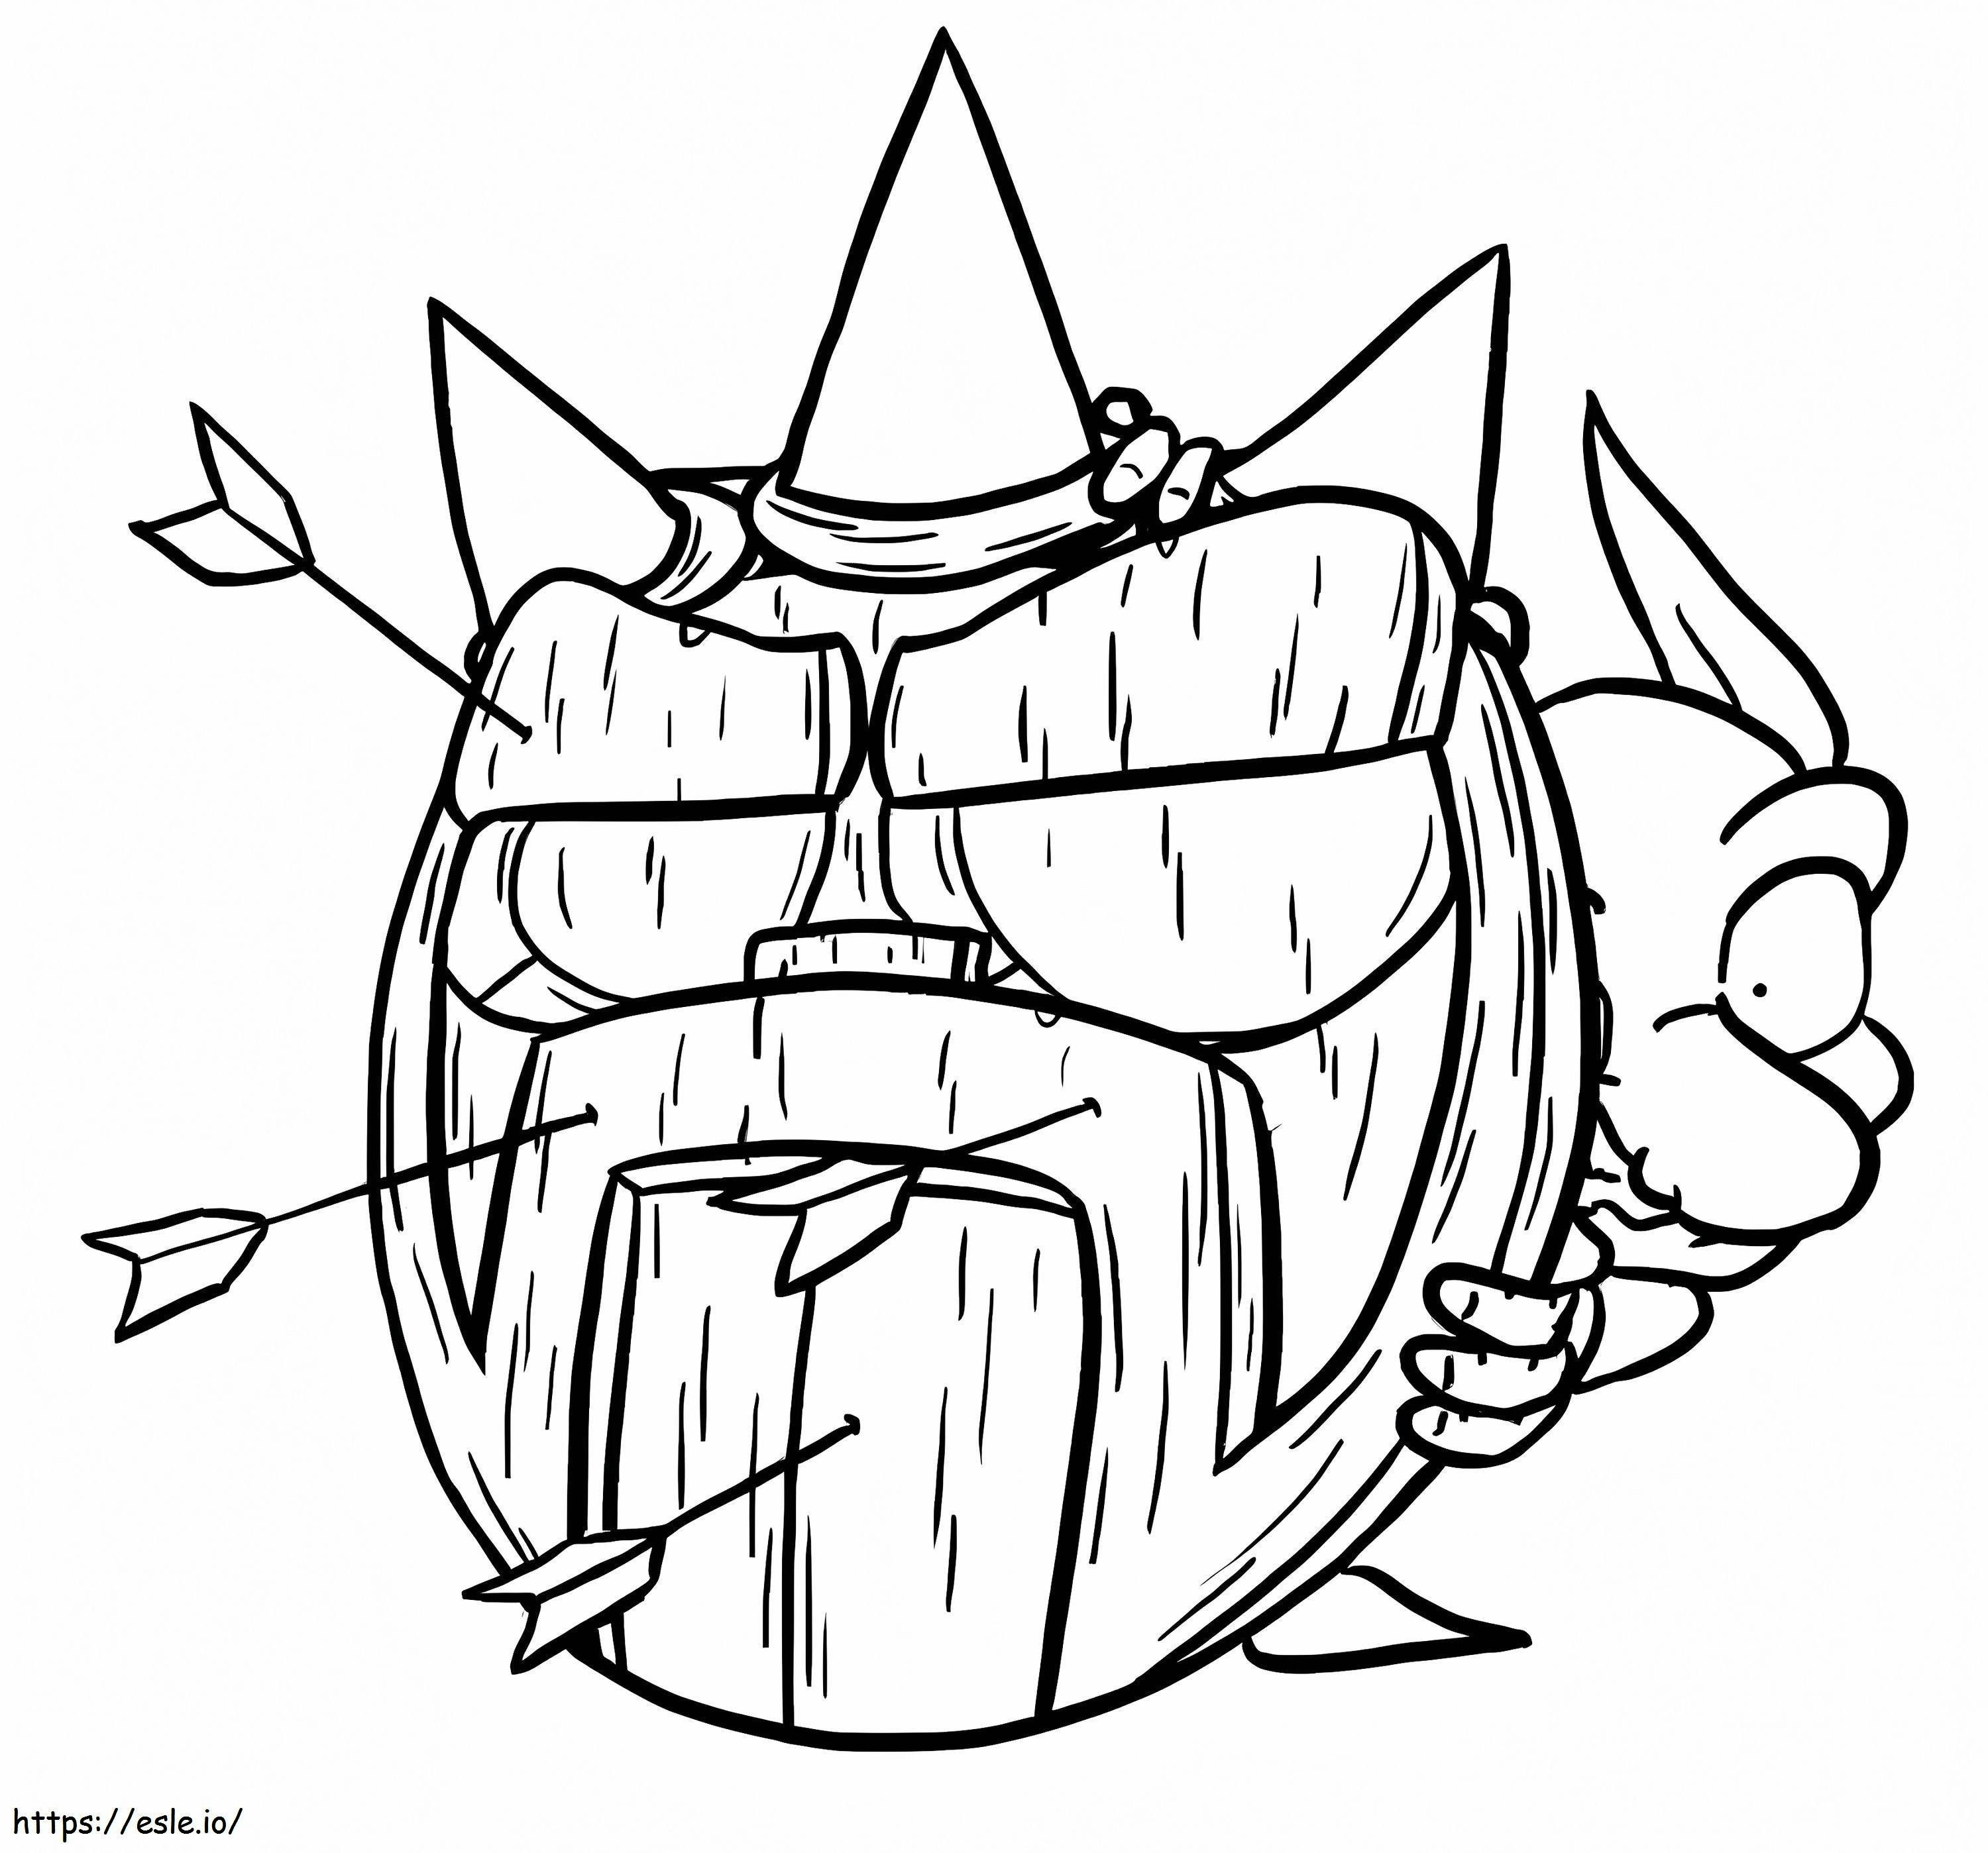 Goblin With Shield coloring page